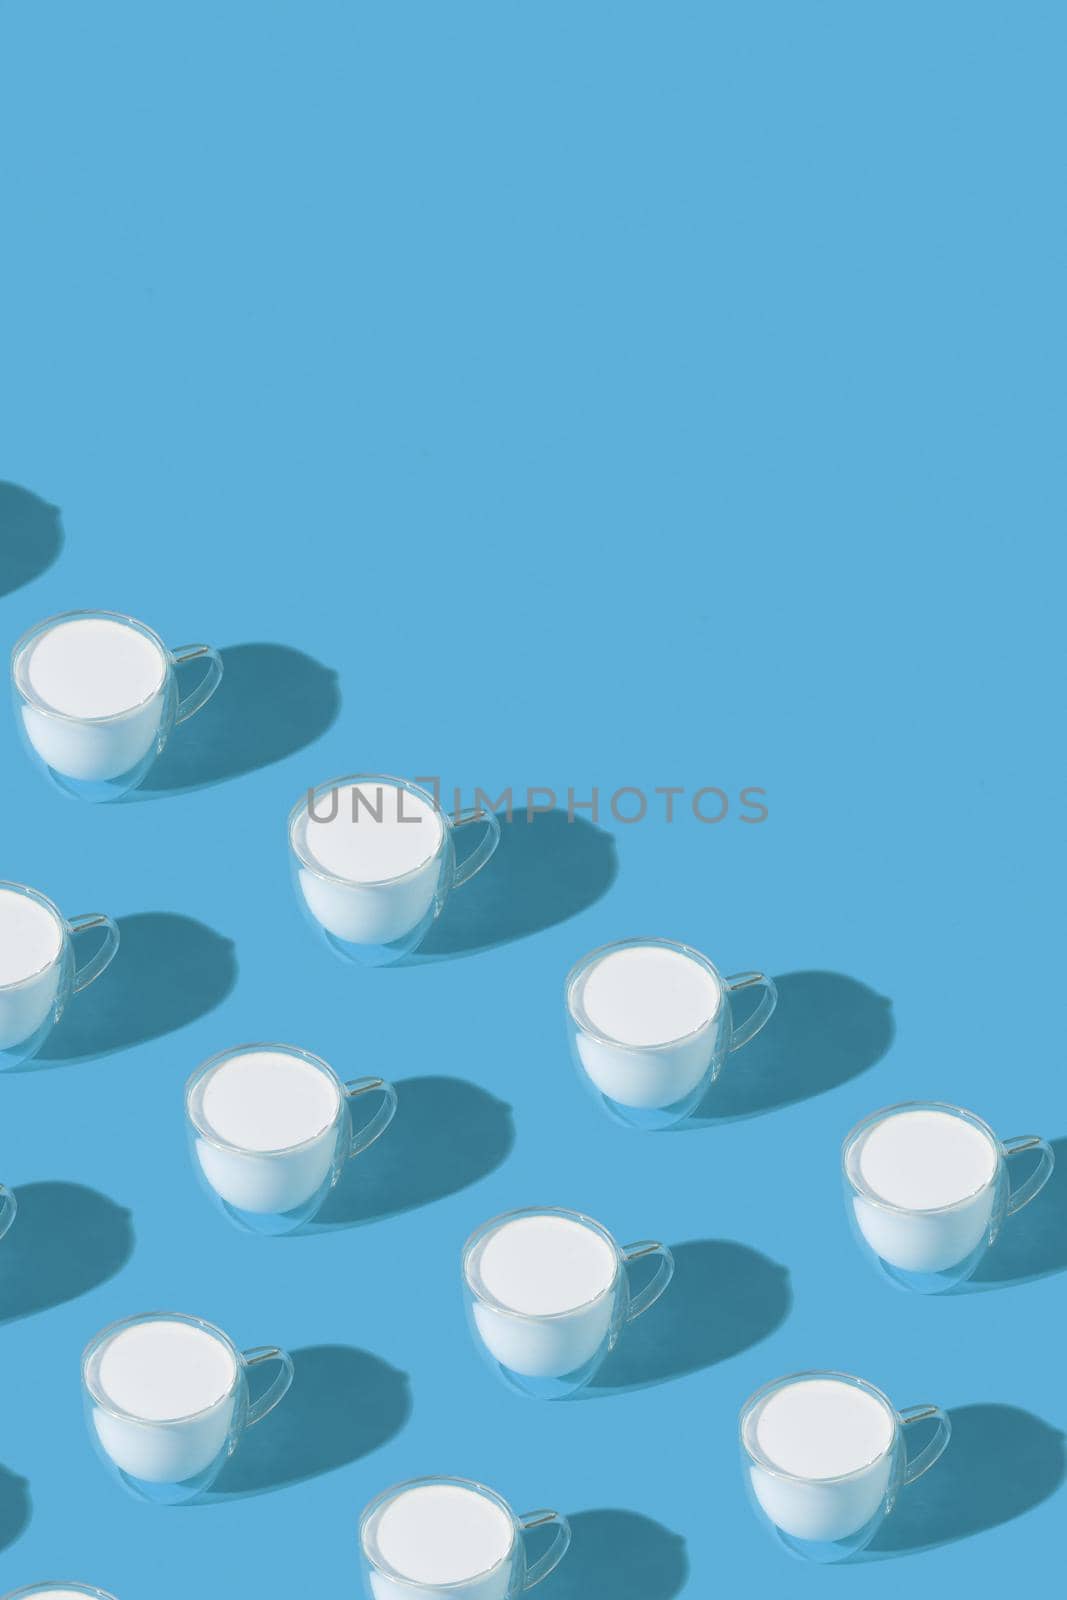 Milk in a glass pattern on a colored background, dairy diet concept. High quality photo